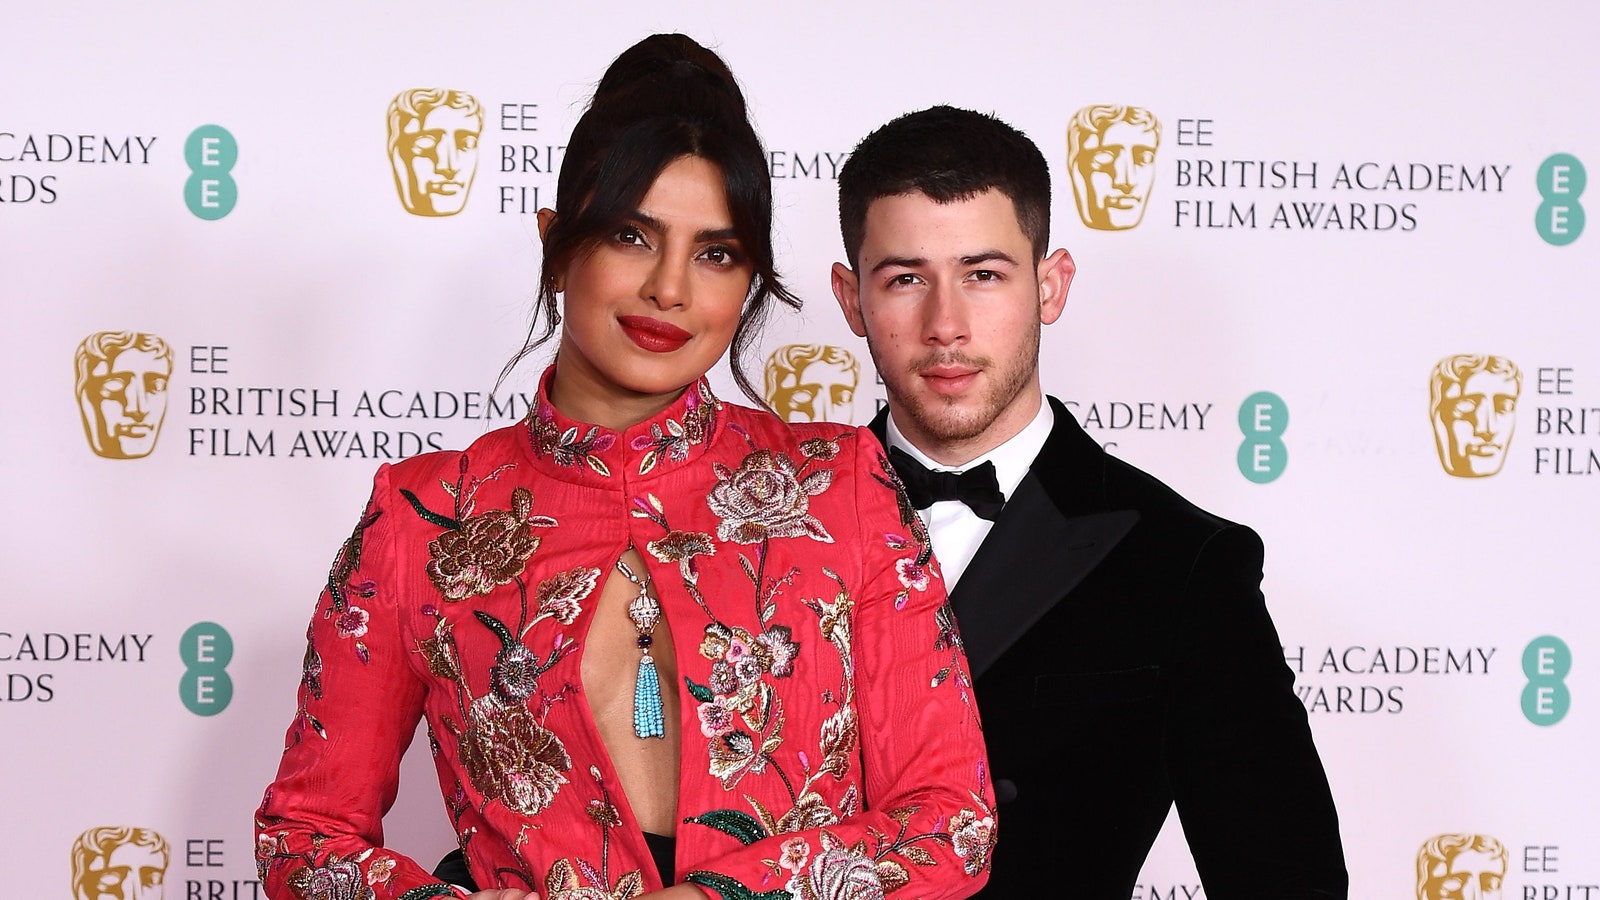 BAFTAs 2021: Fashion-Live From the Red Carpet